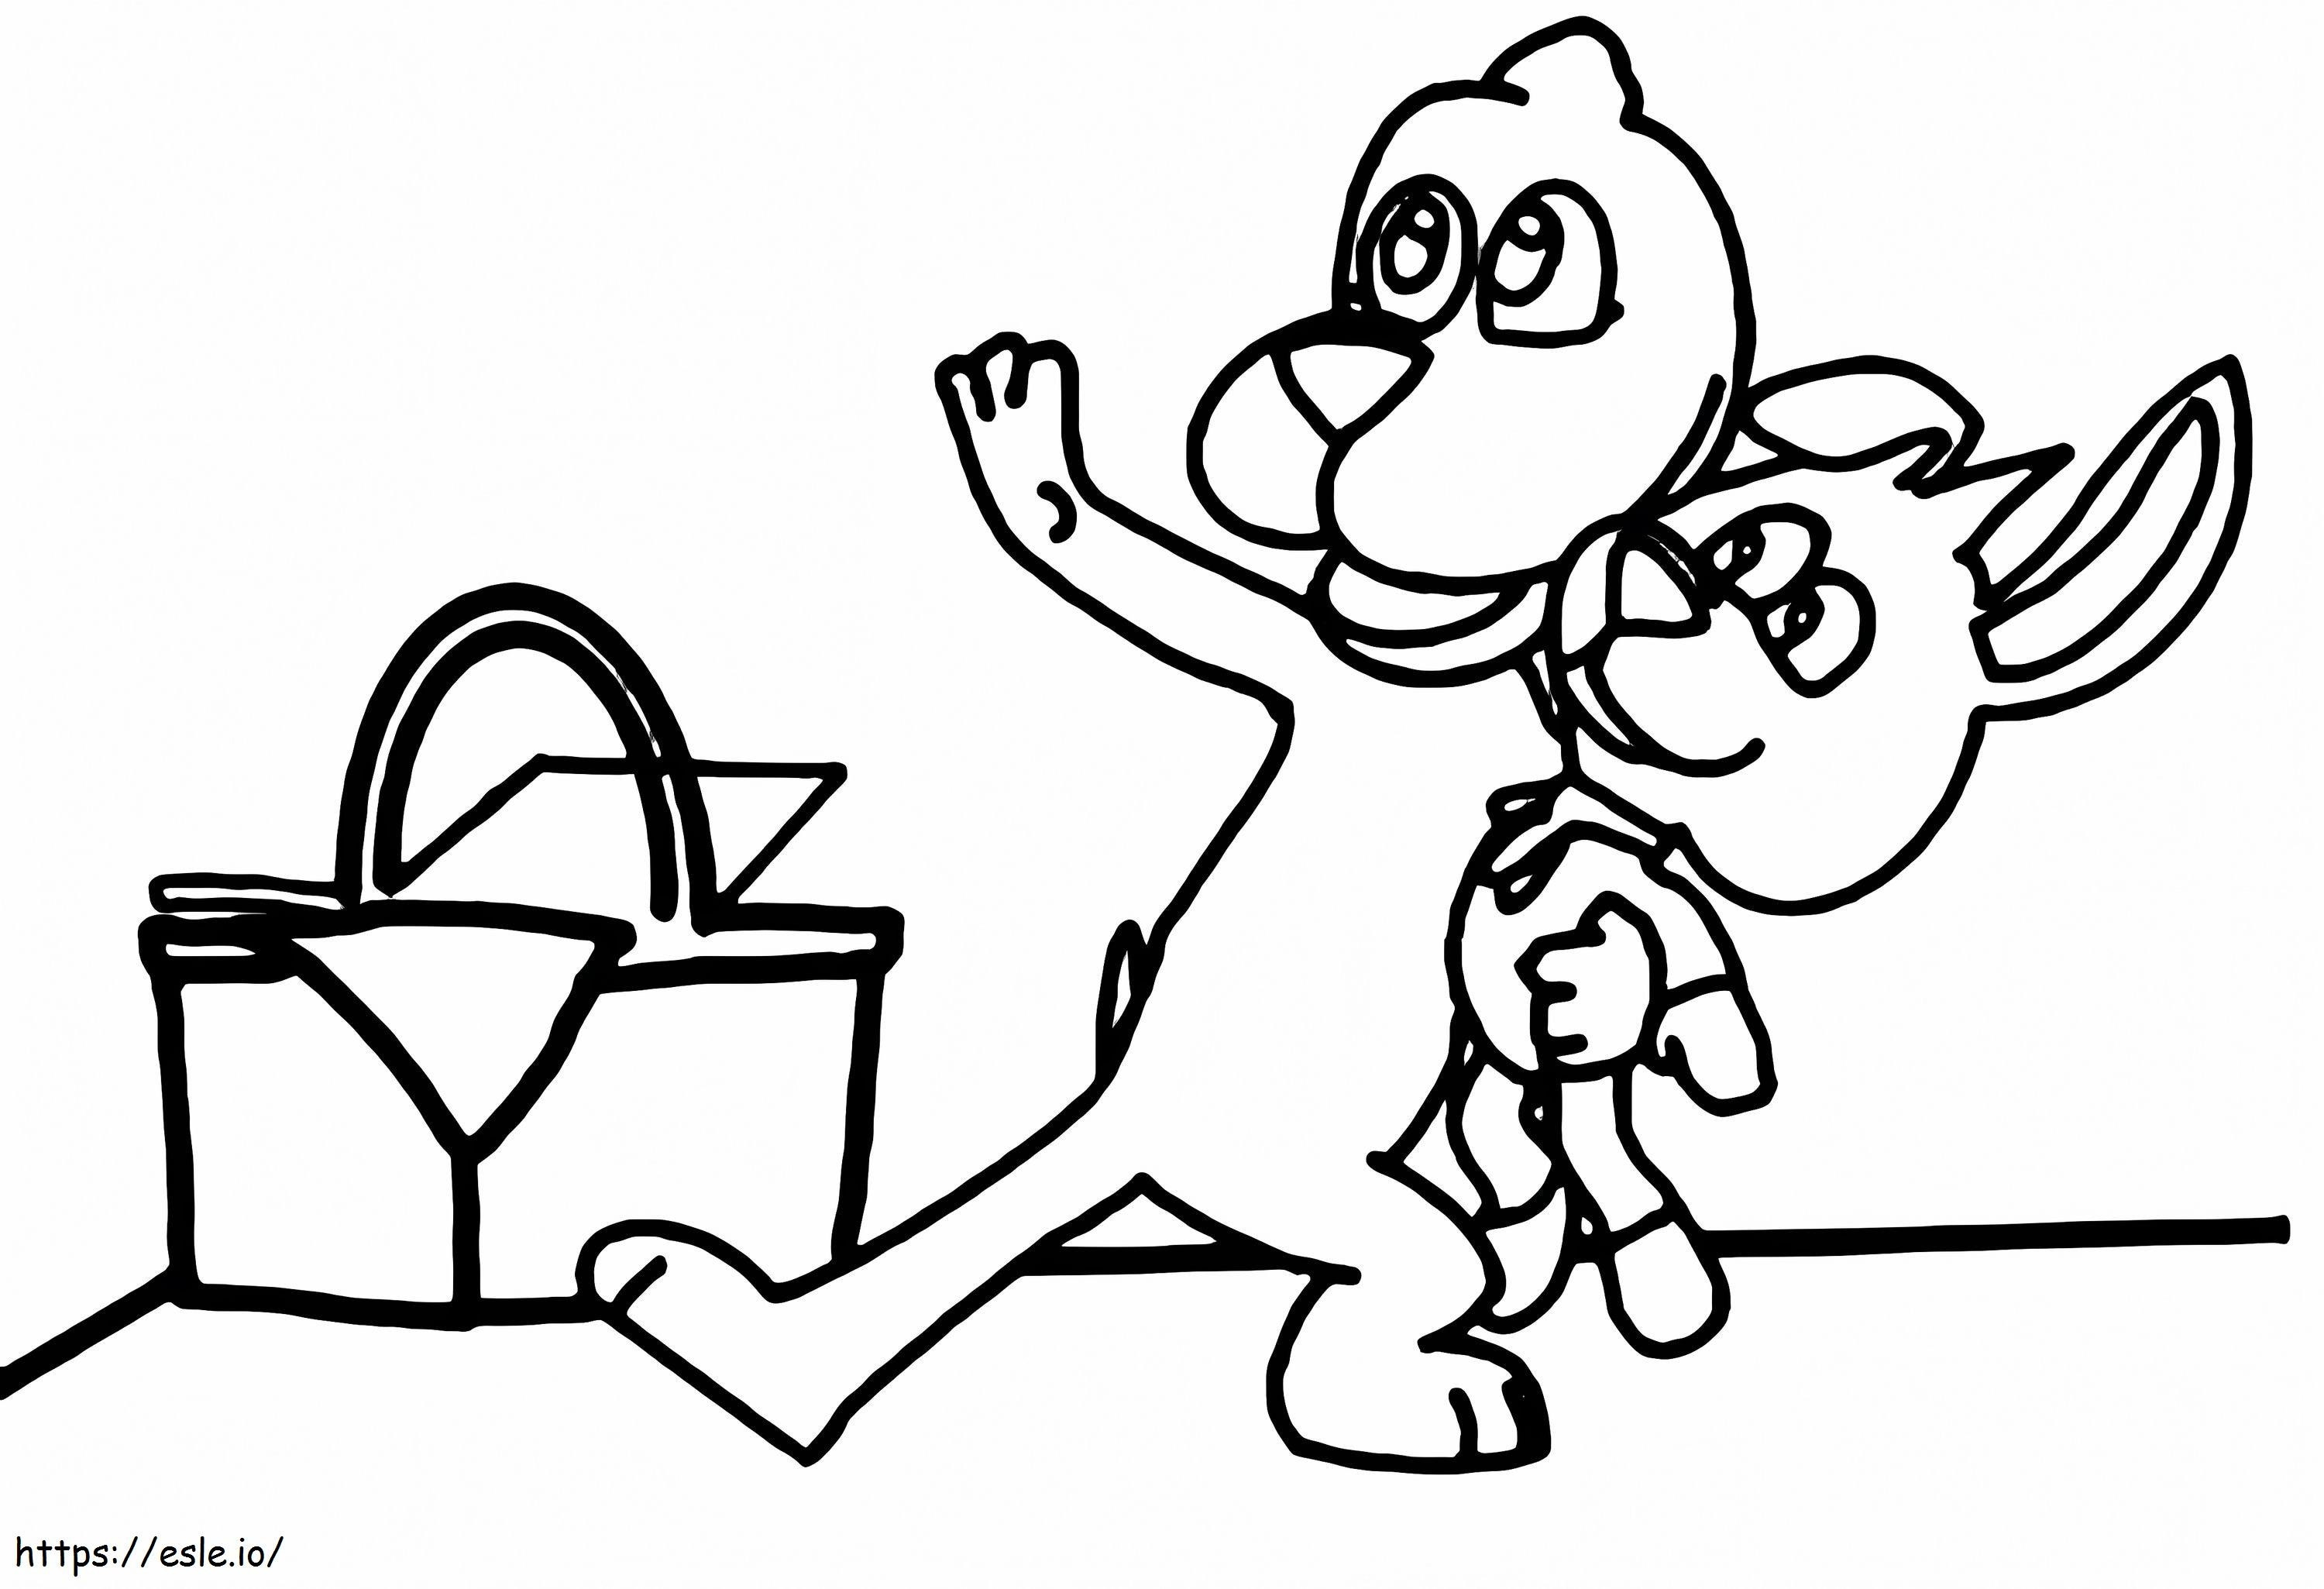 Go Dog Go 1 coloring page